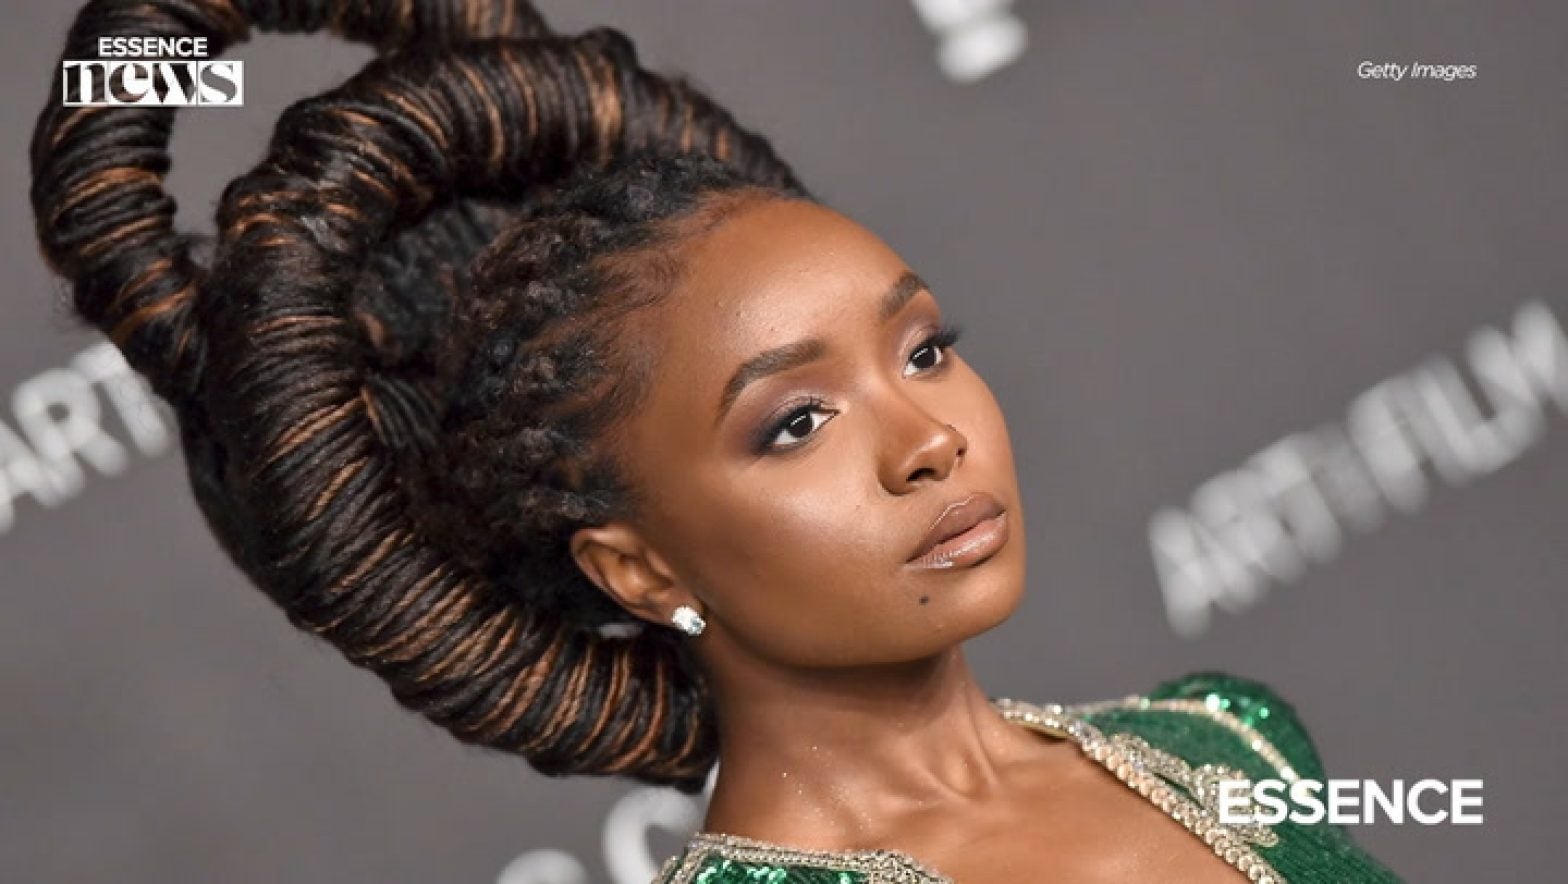 Kiki Layne Feels ‘Very Blessed’ As A Black Woman ‘At This Time’ In The Entertainment Industry